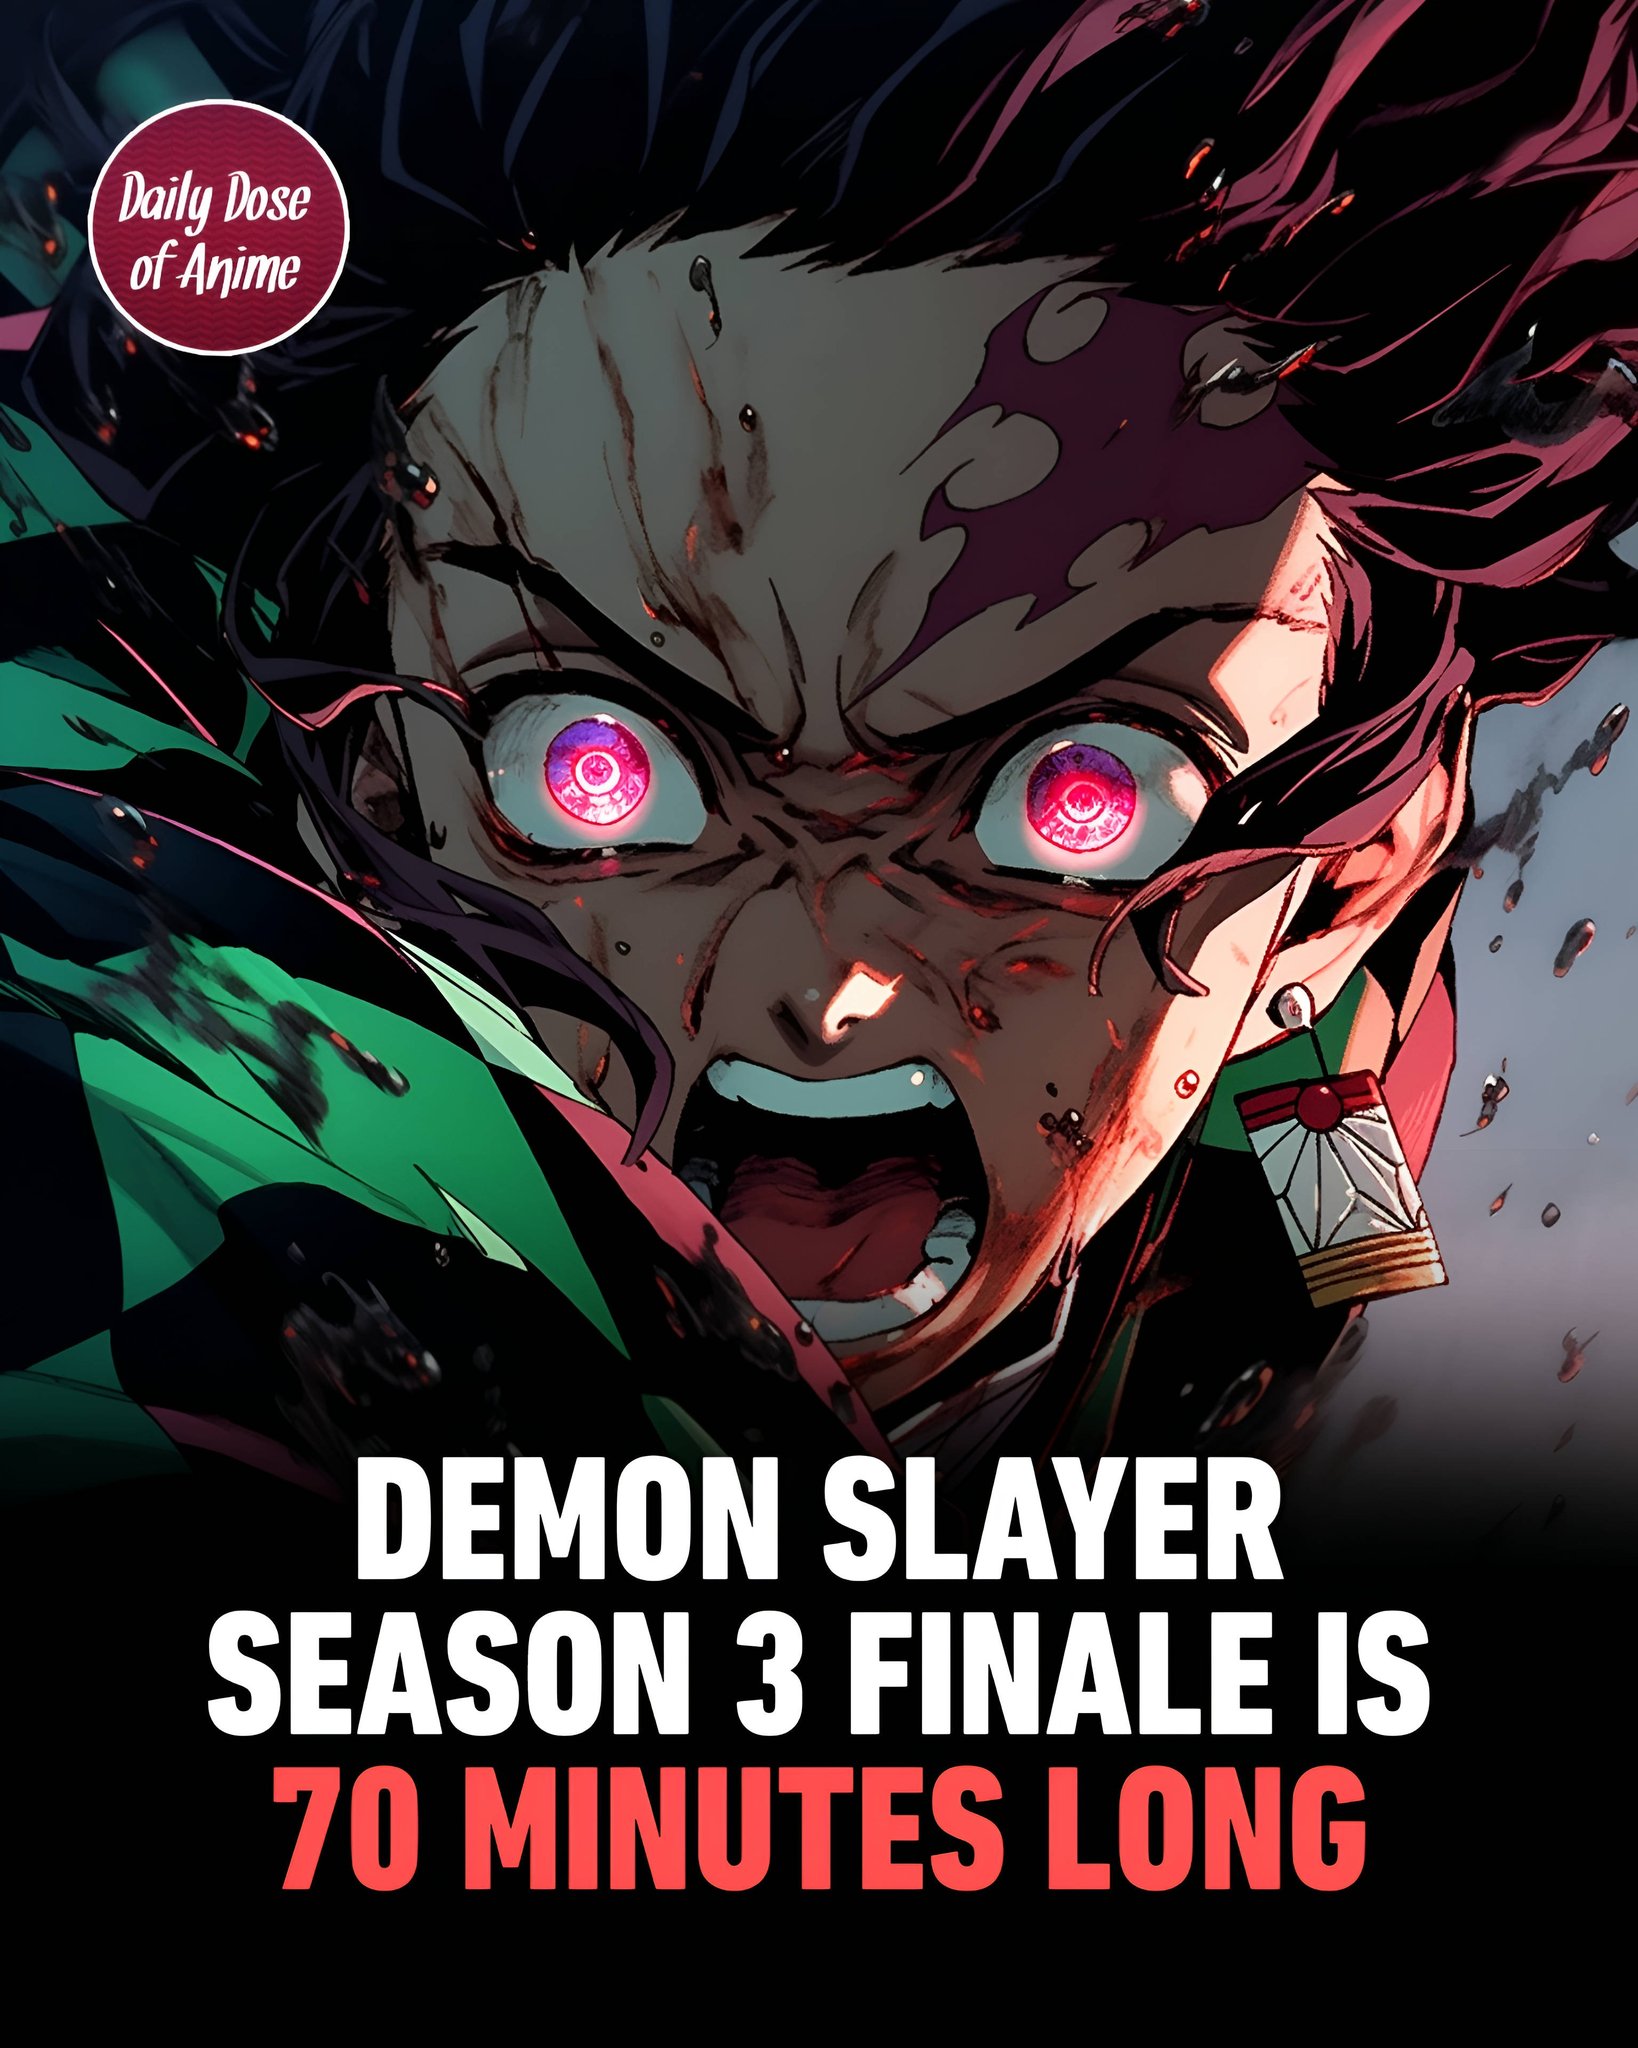 Demon Slayer' Season 3 Finale Will Be An Extended 70-Minute Episode